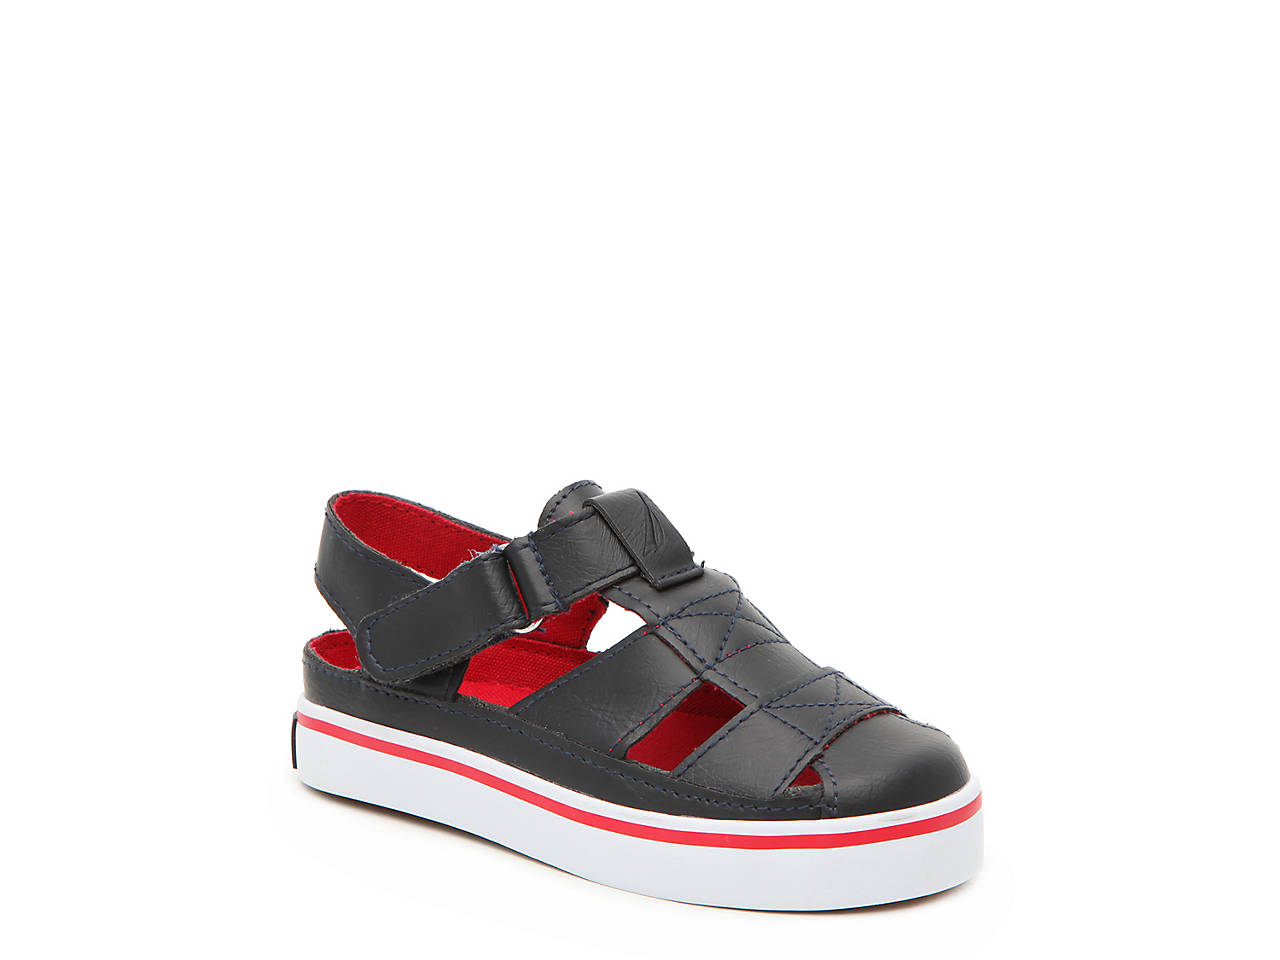 Toddler//Little Kid//Youth Nautica Kids Mikkel Closed-Toe Outdoor Sport Casual Sandals